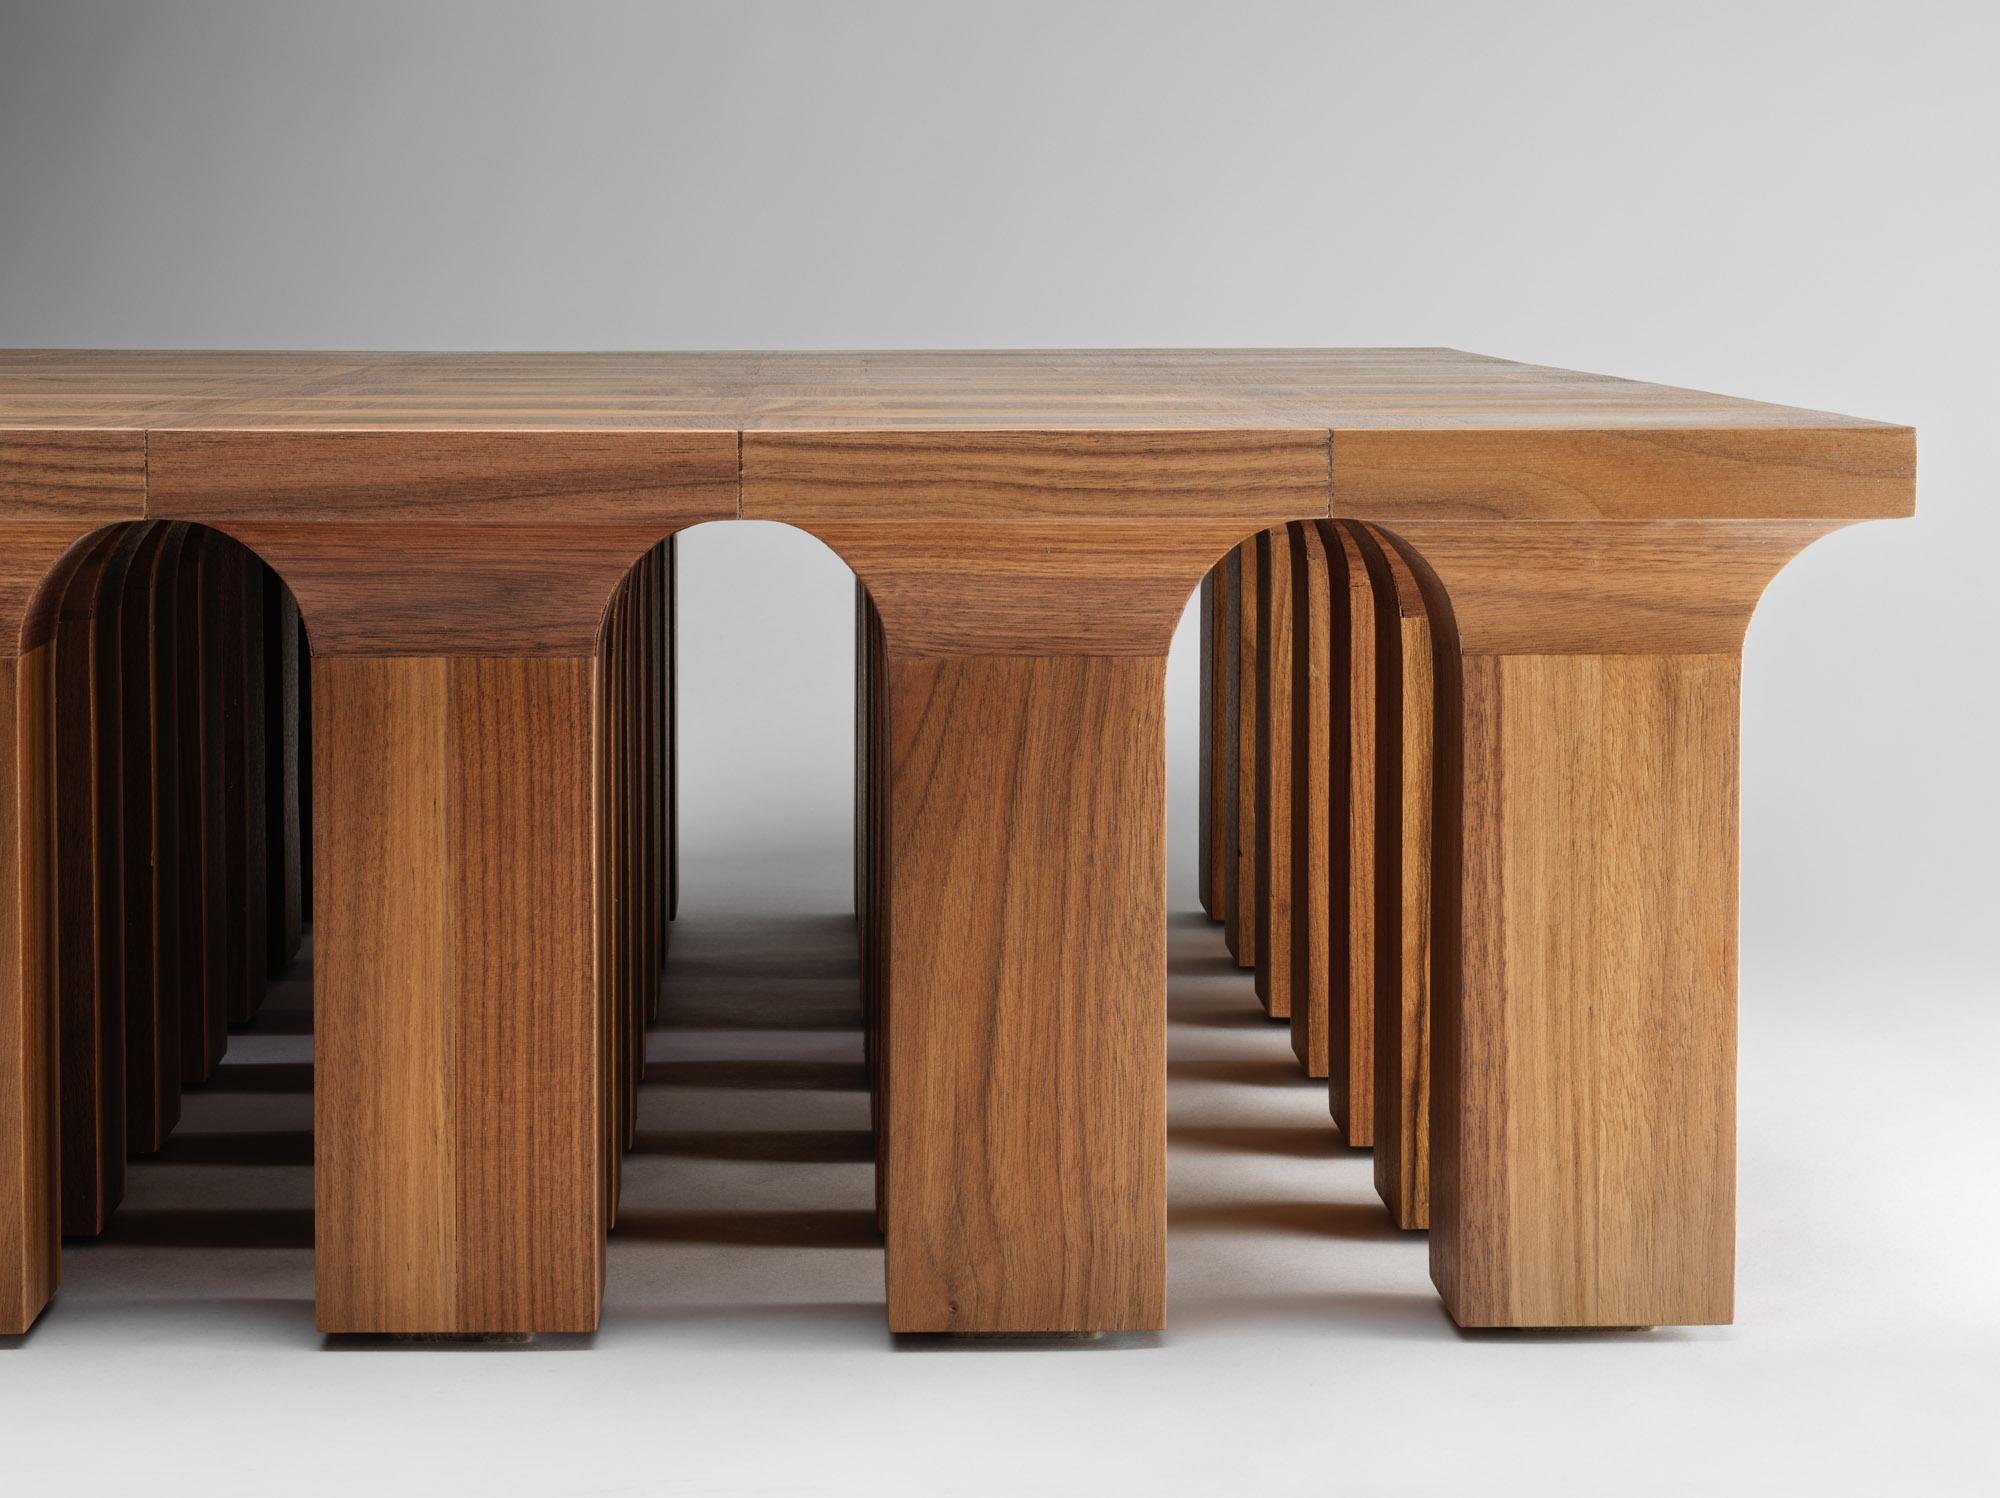 Tim Vranken is a Belgian furniture designer who focuses on solid, handmade furniture. Throughout his designs the use of pure materials and honest natural processes are paramount. The result is an unconcealed interplay of lines and shapes, without